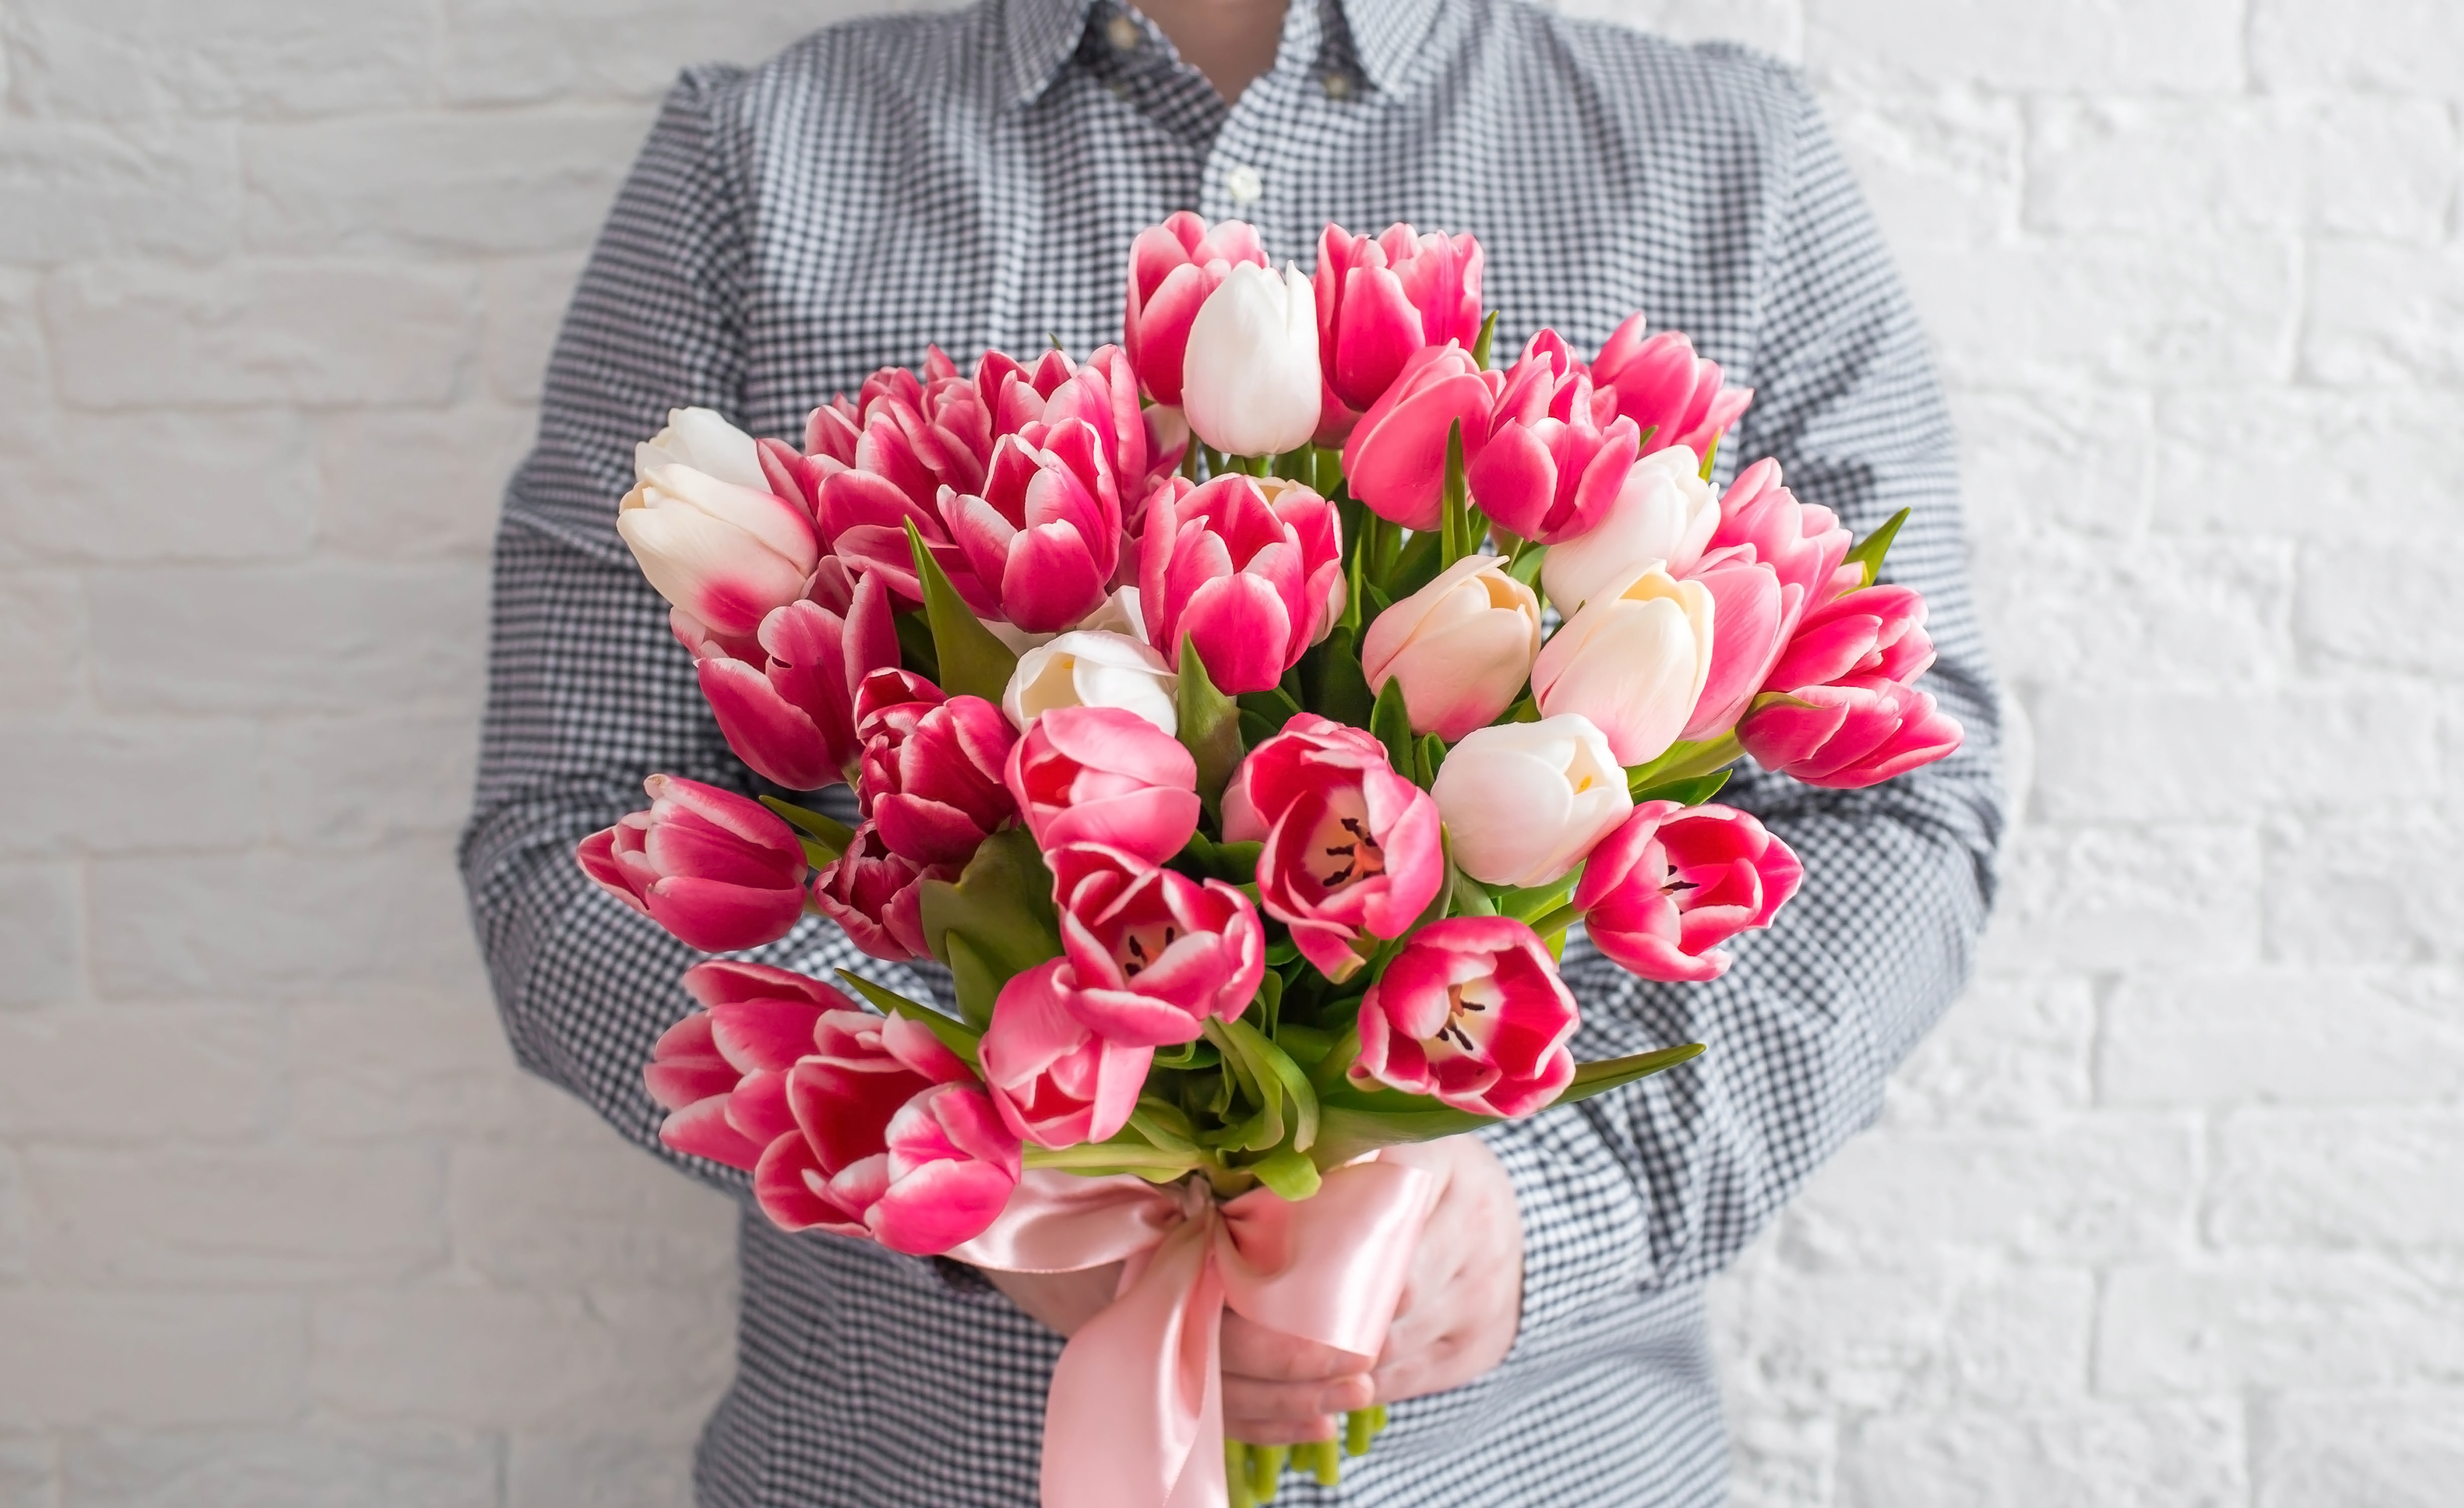 A man holding a bouquet of white and pink tulips | Source: Shutterstock